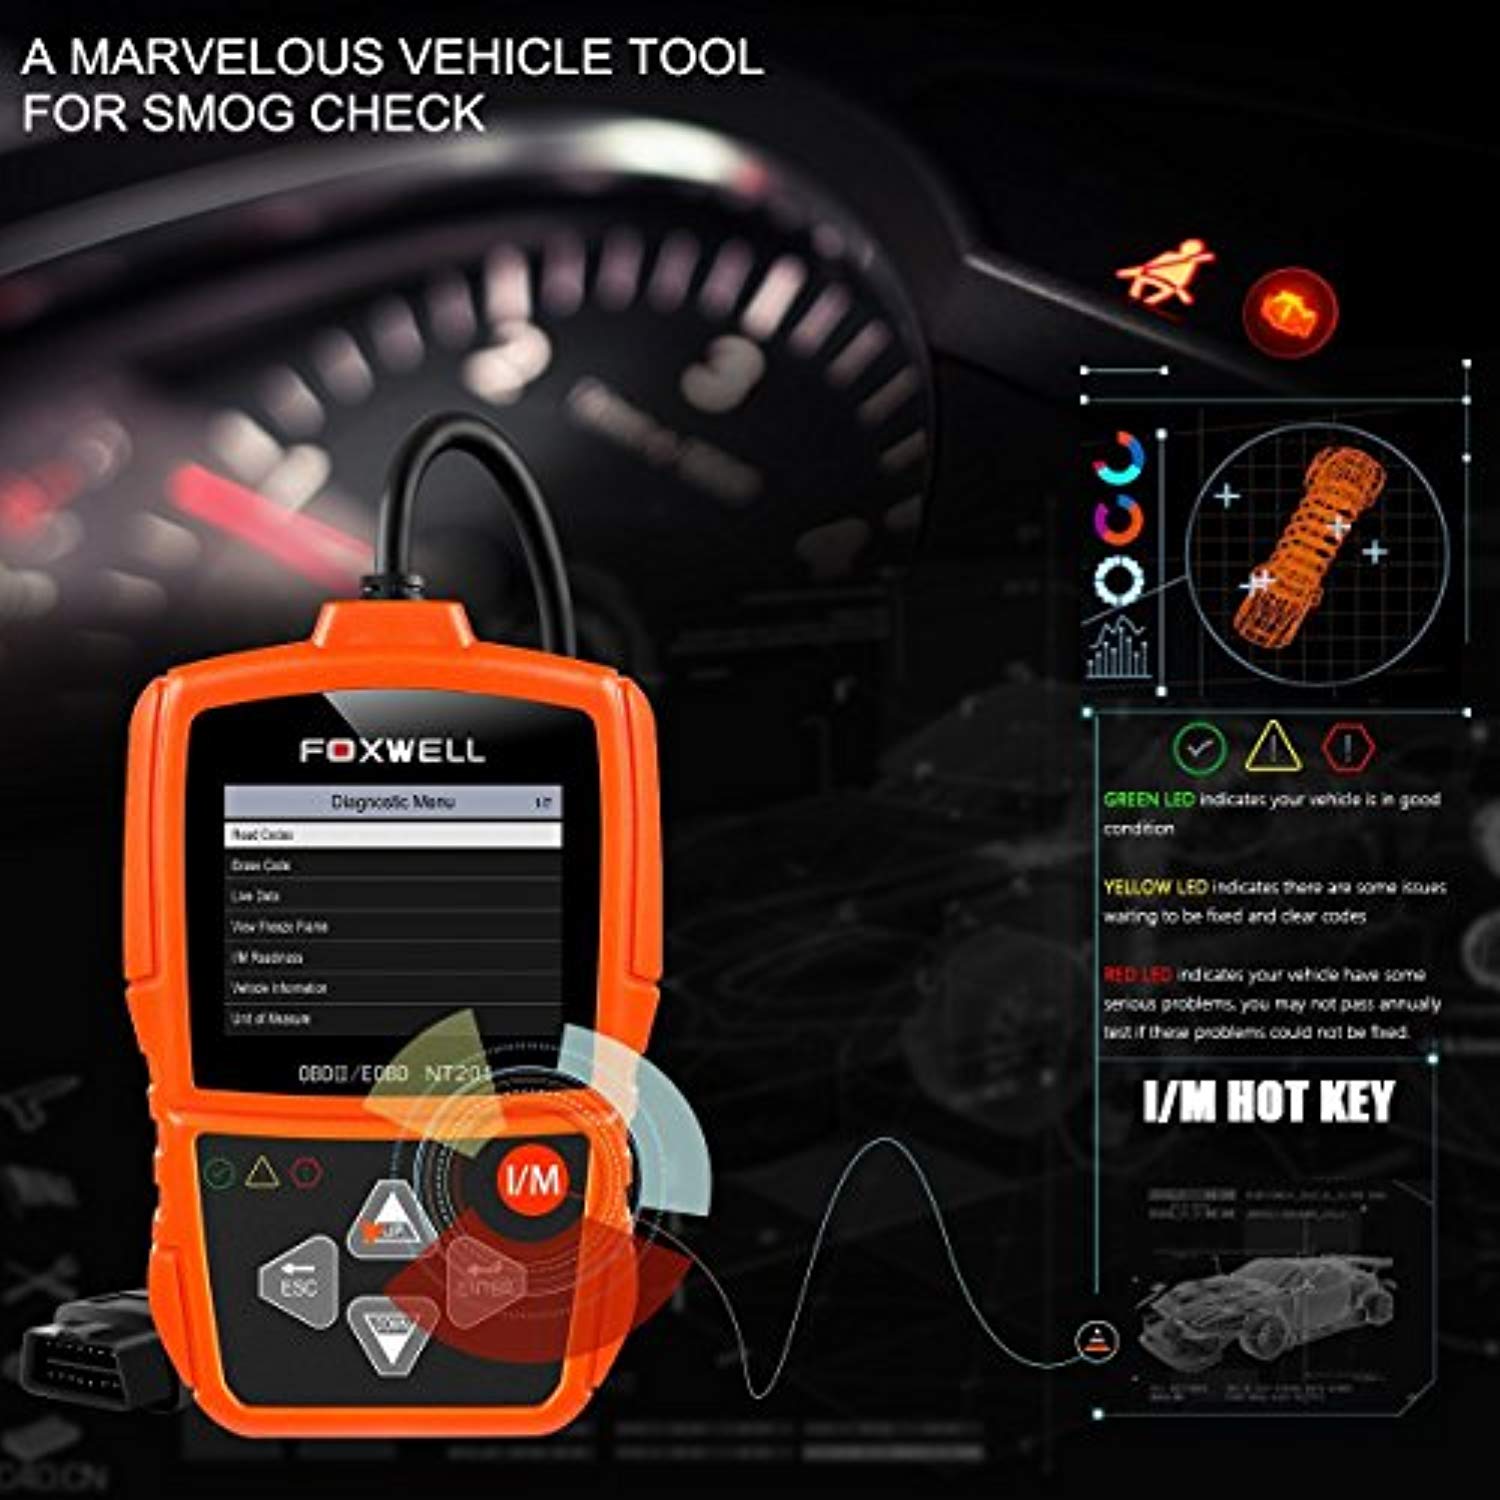 Foxwell NT201 OBD2 Scanner Auto Engine Fault Code Reader 